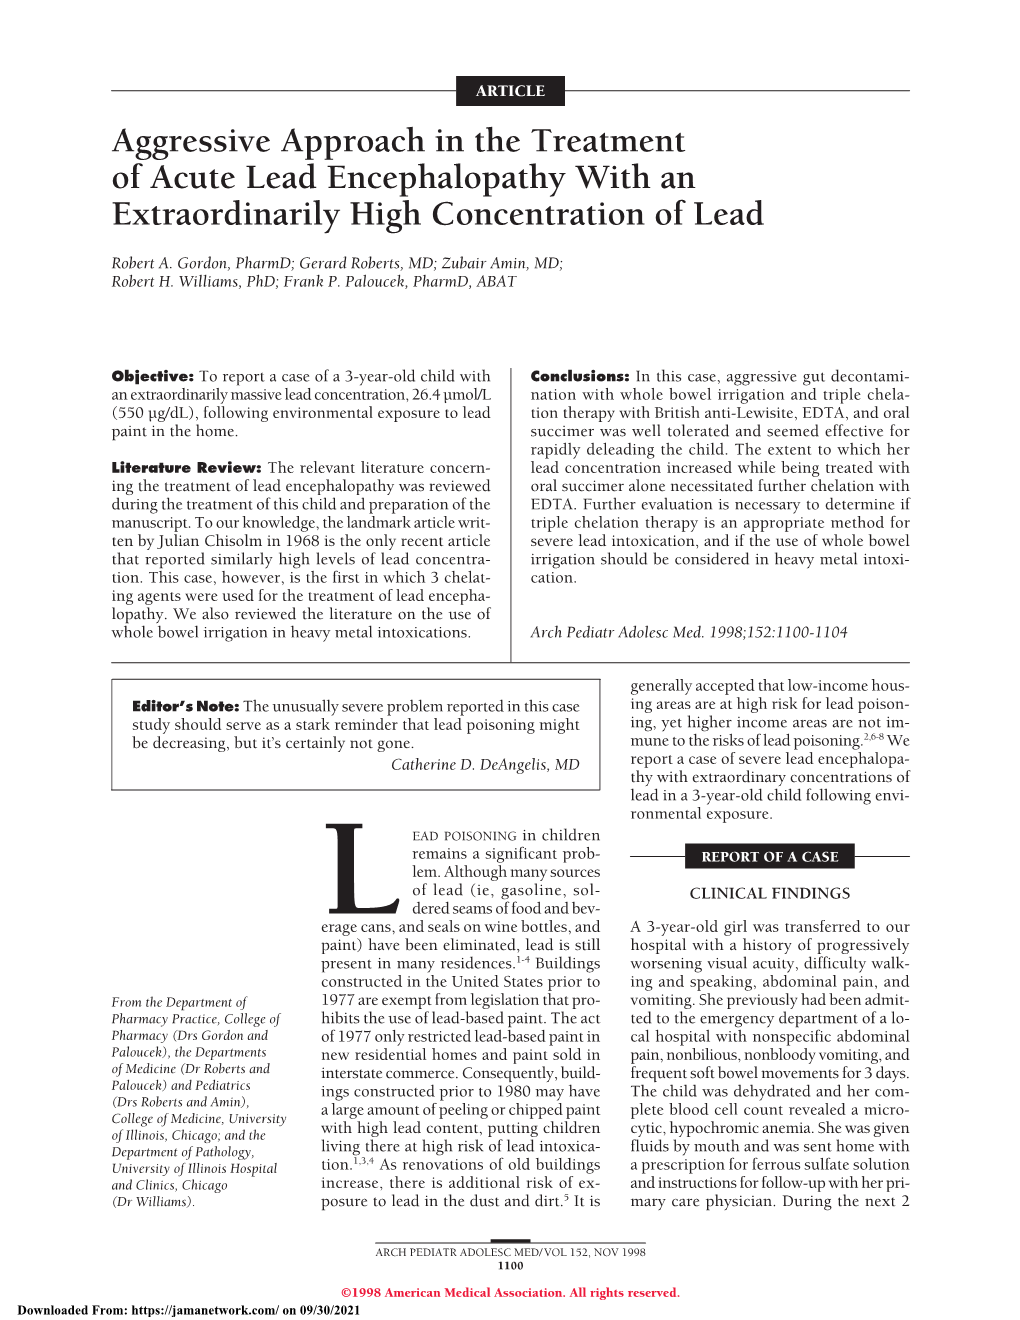 Aggressive Approach in the Treatment of Acute Lead Encephalopathy with an Extraordinarily High Concentration of Lead